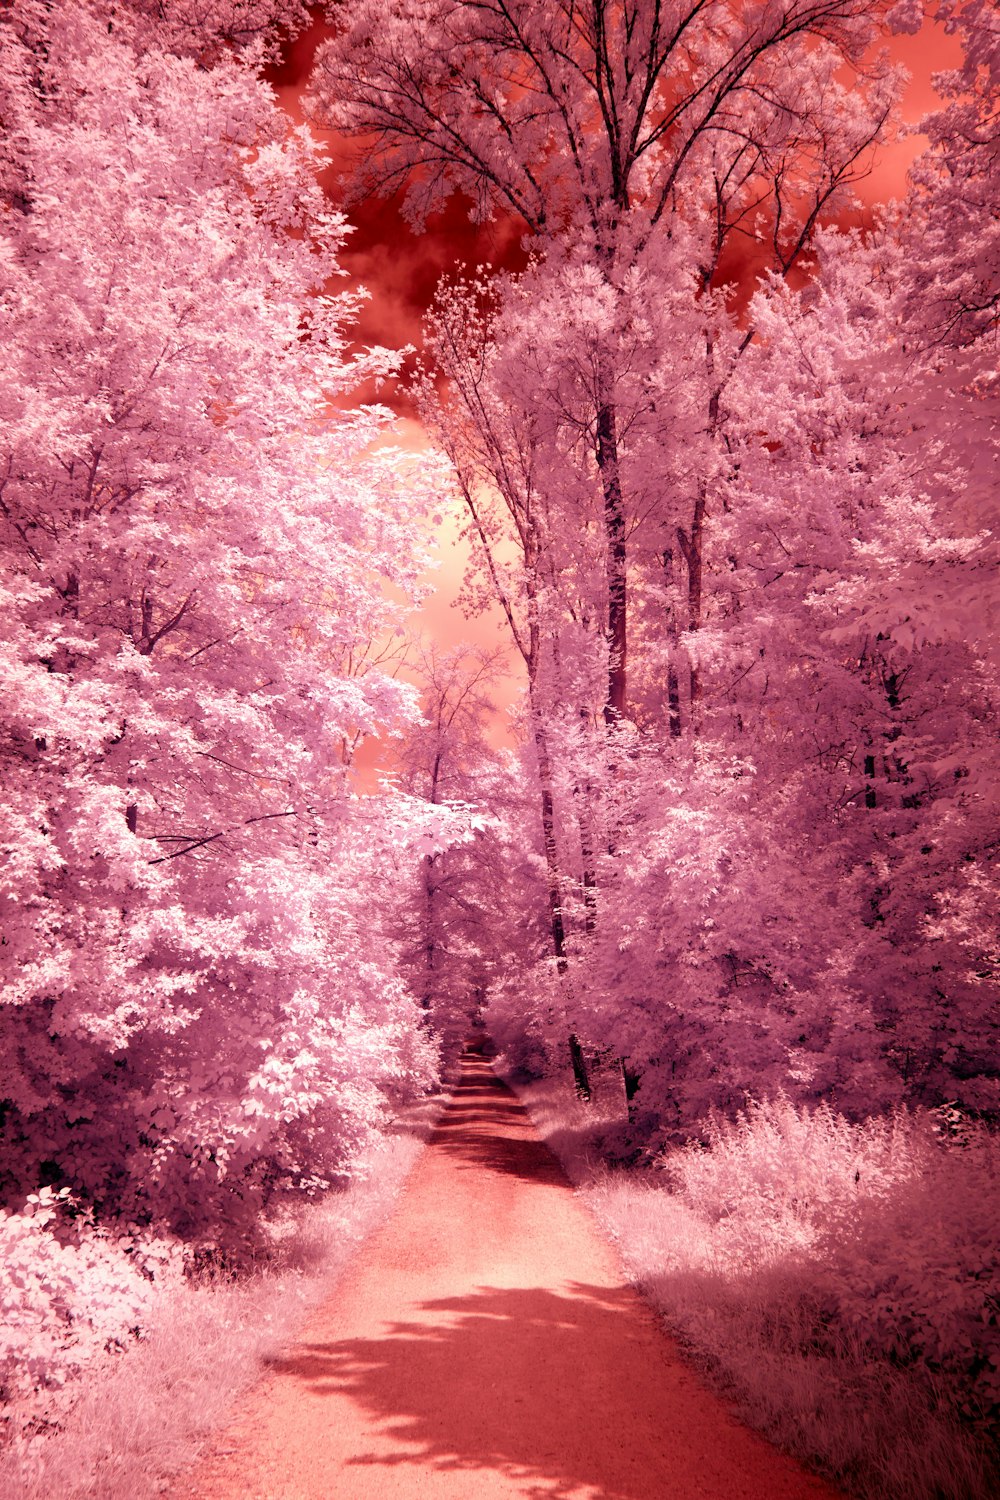 a red dirt road surrounded by pink trees